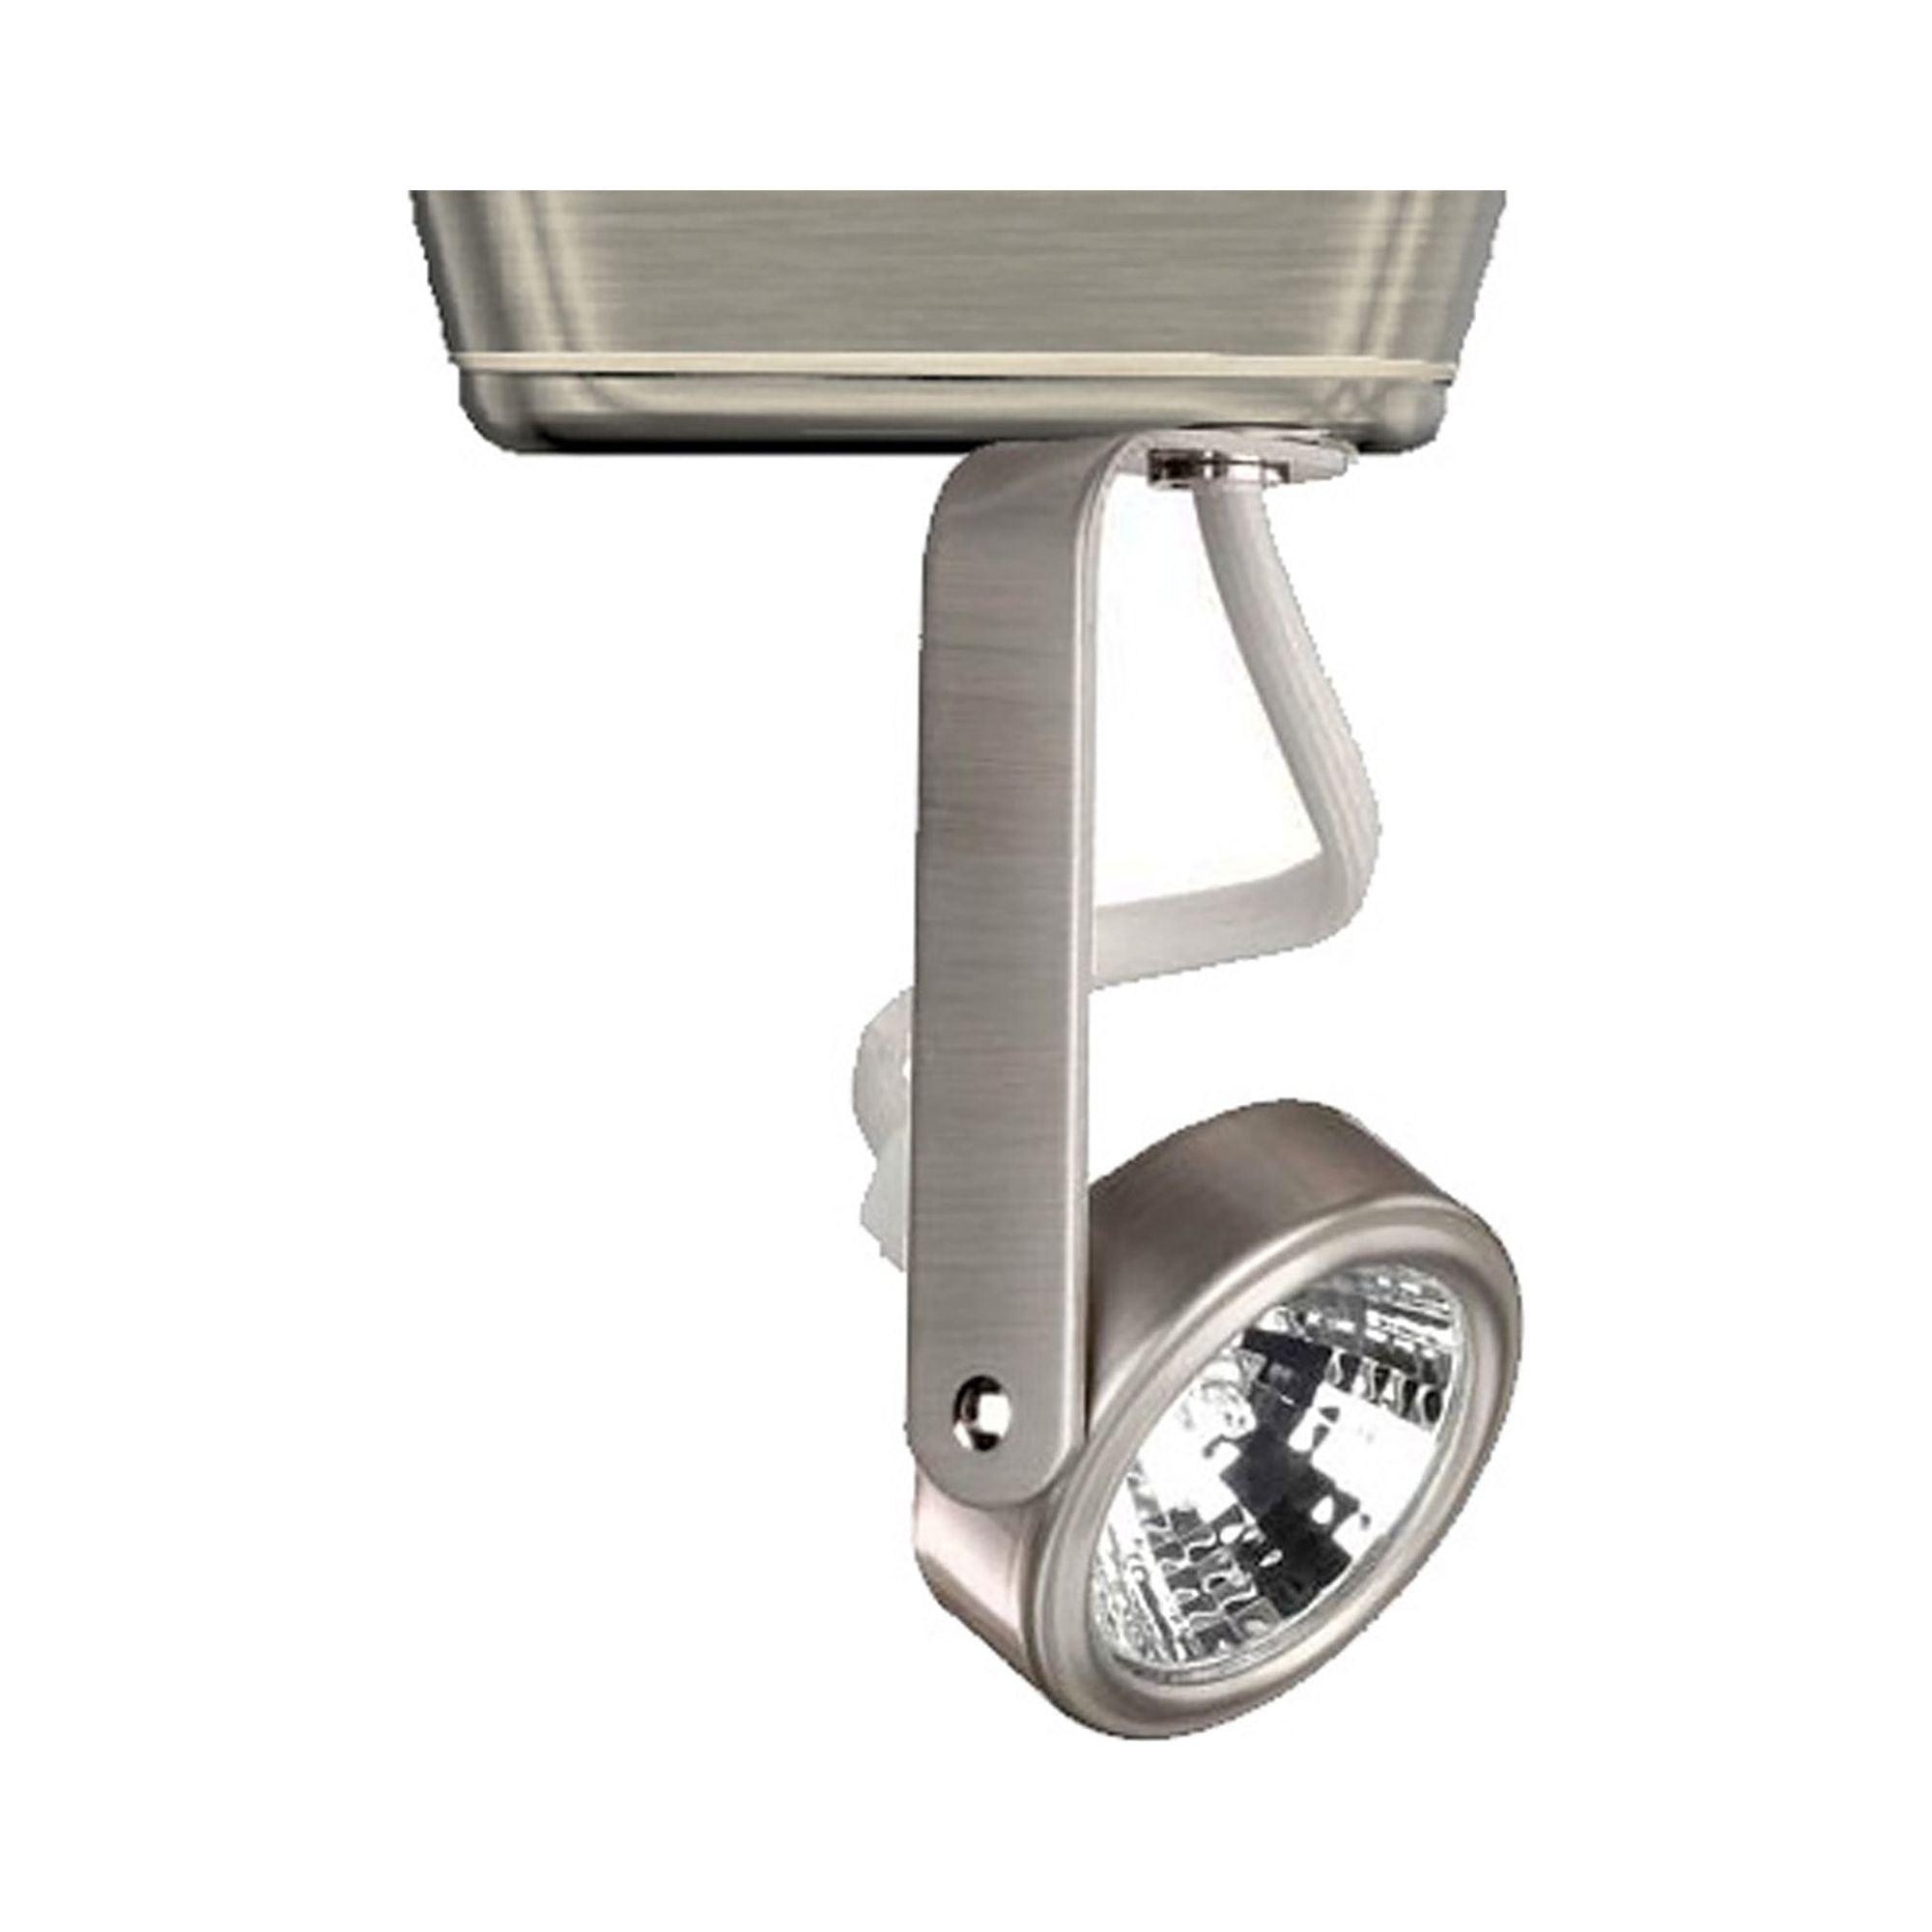 WAC Lighting - HT-180 Low Voltage Track Head for L Track - Lights Canada